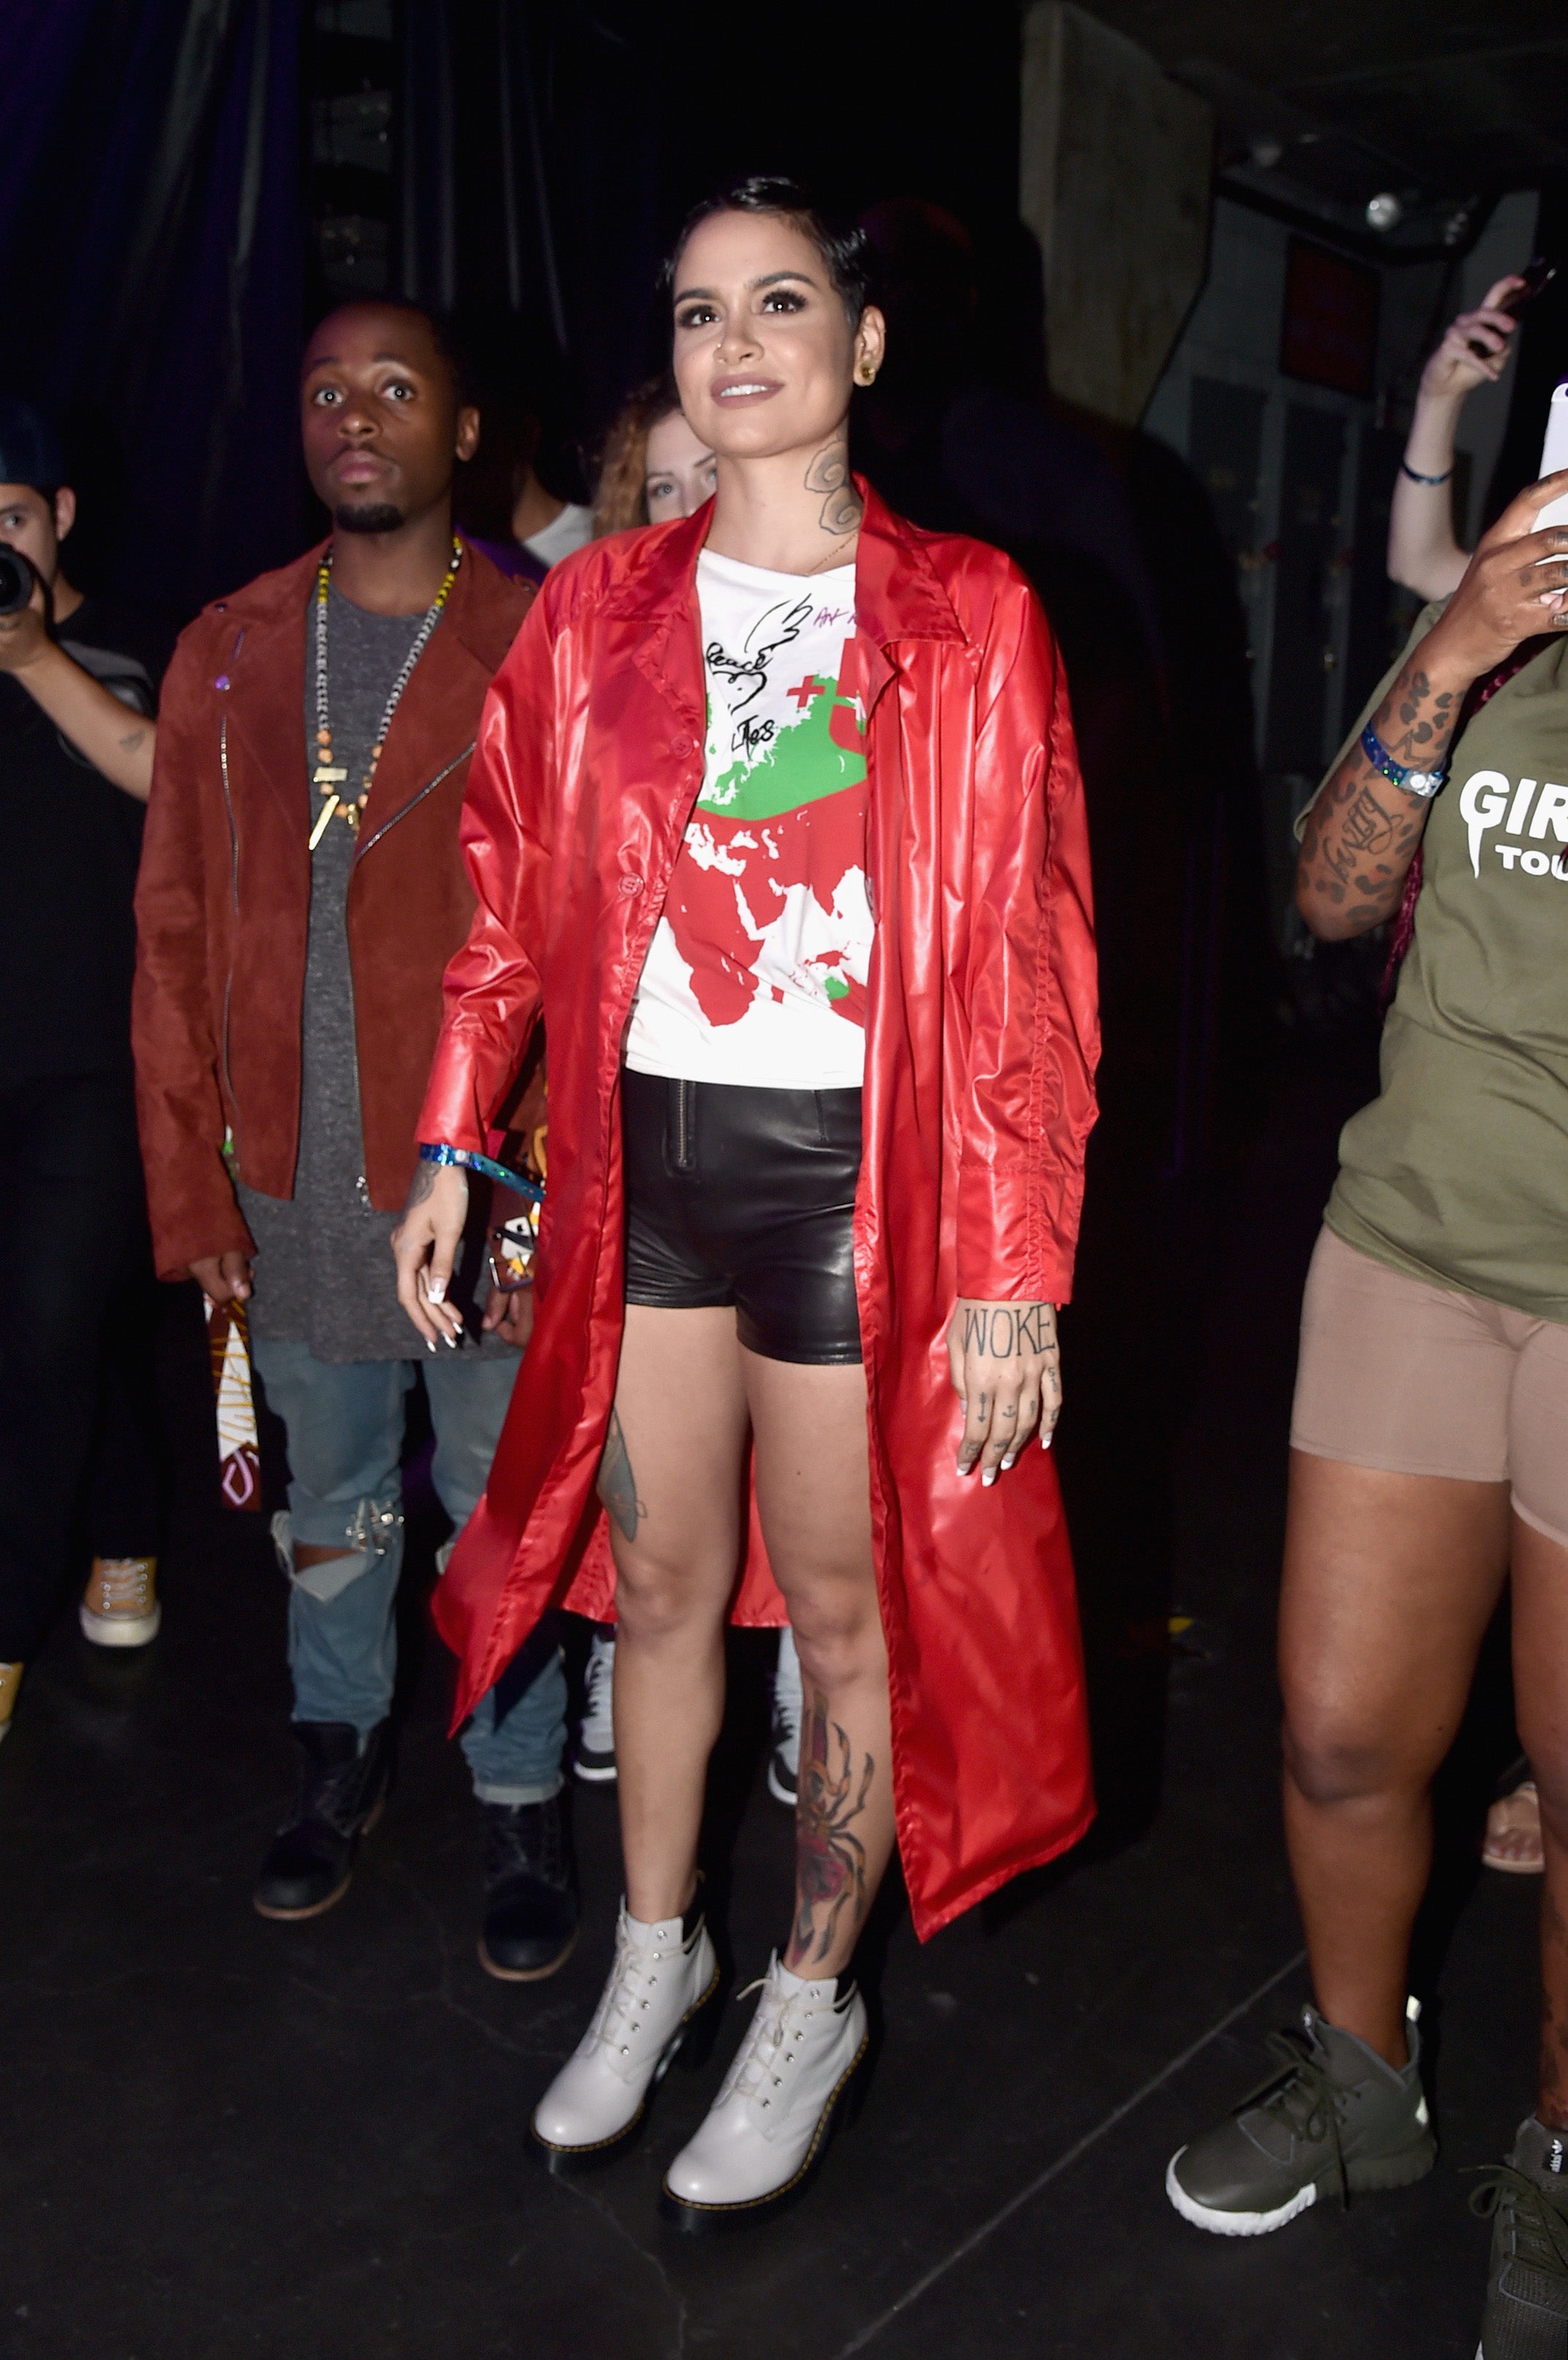 15 Photos That Prove Kehlani’s Style is the Epitome of Tomboy Chic